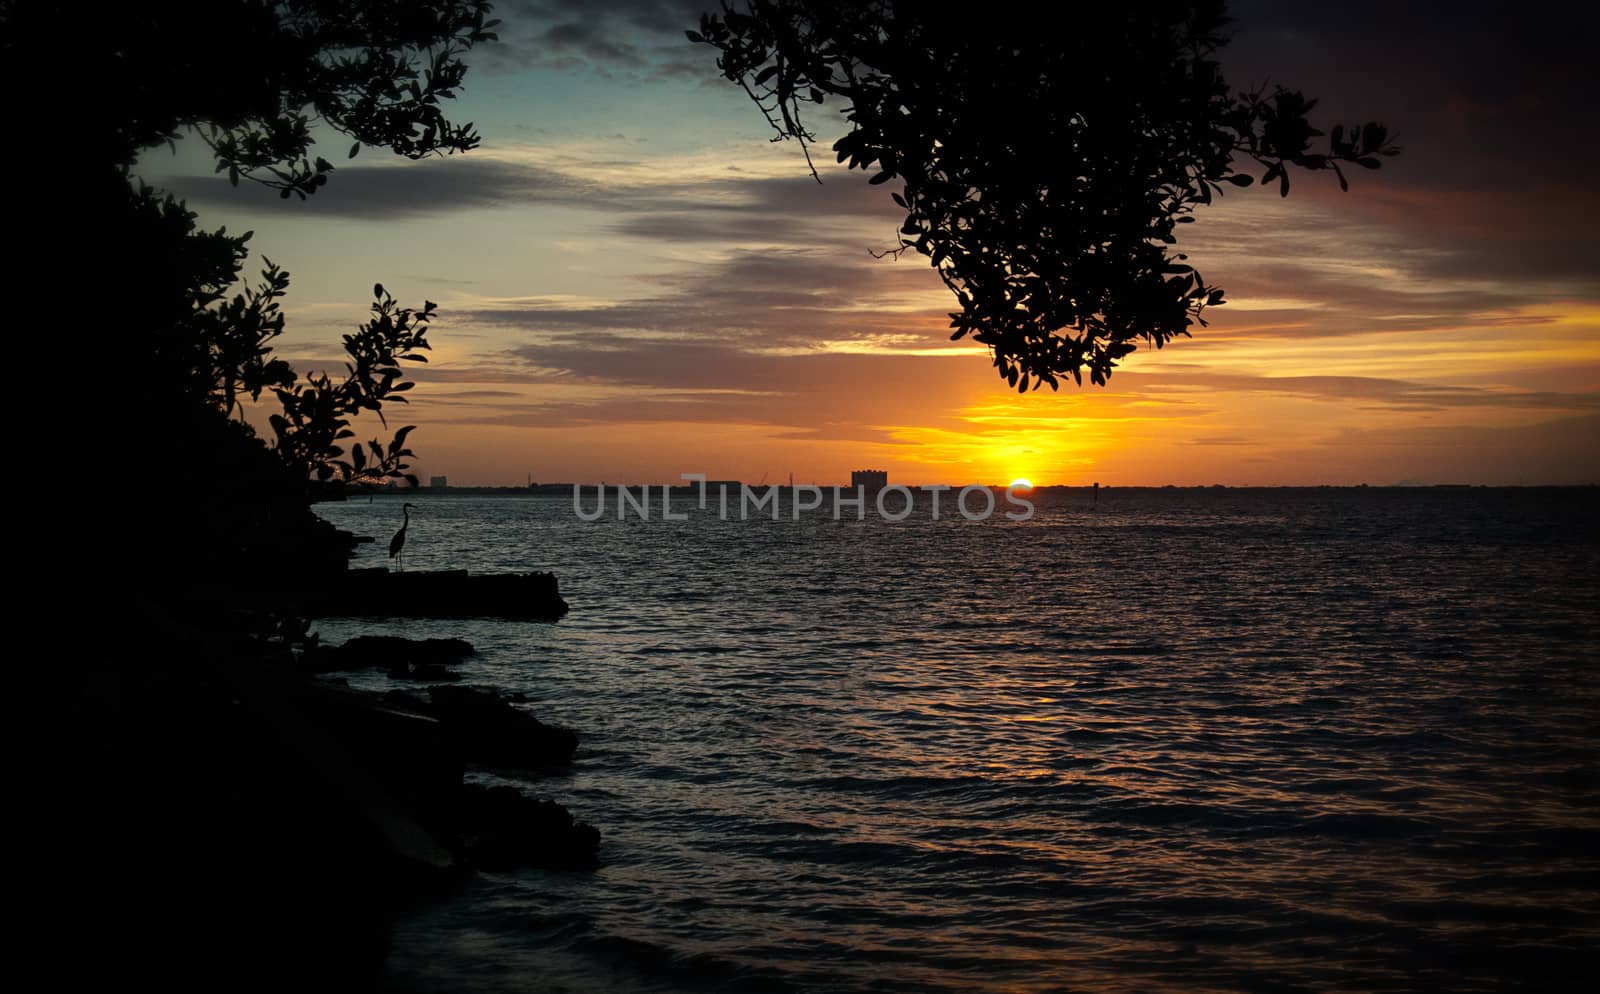 Tampa Bay Sunrise by Charidy